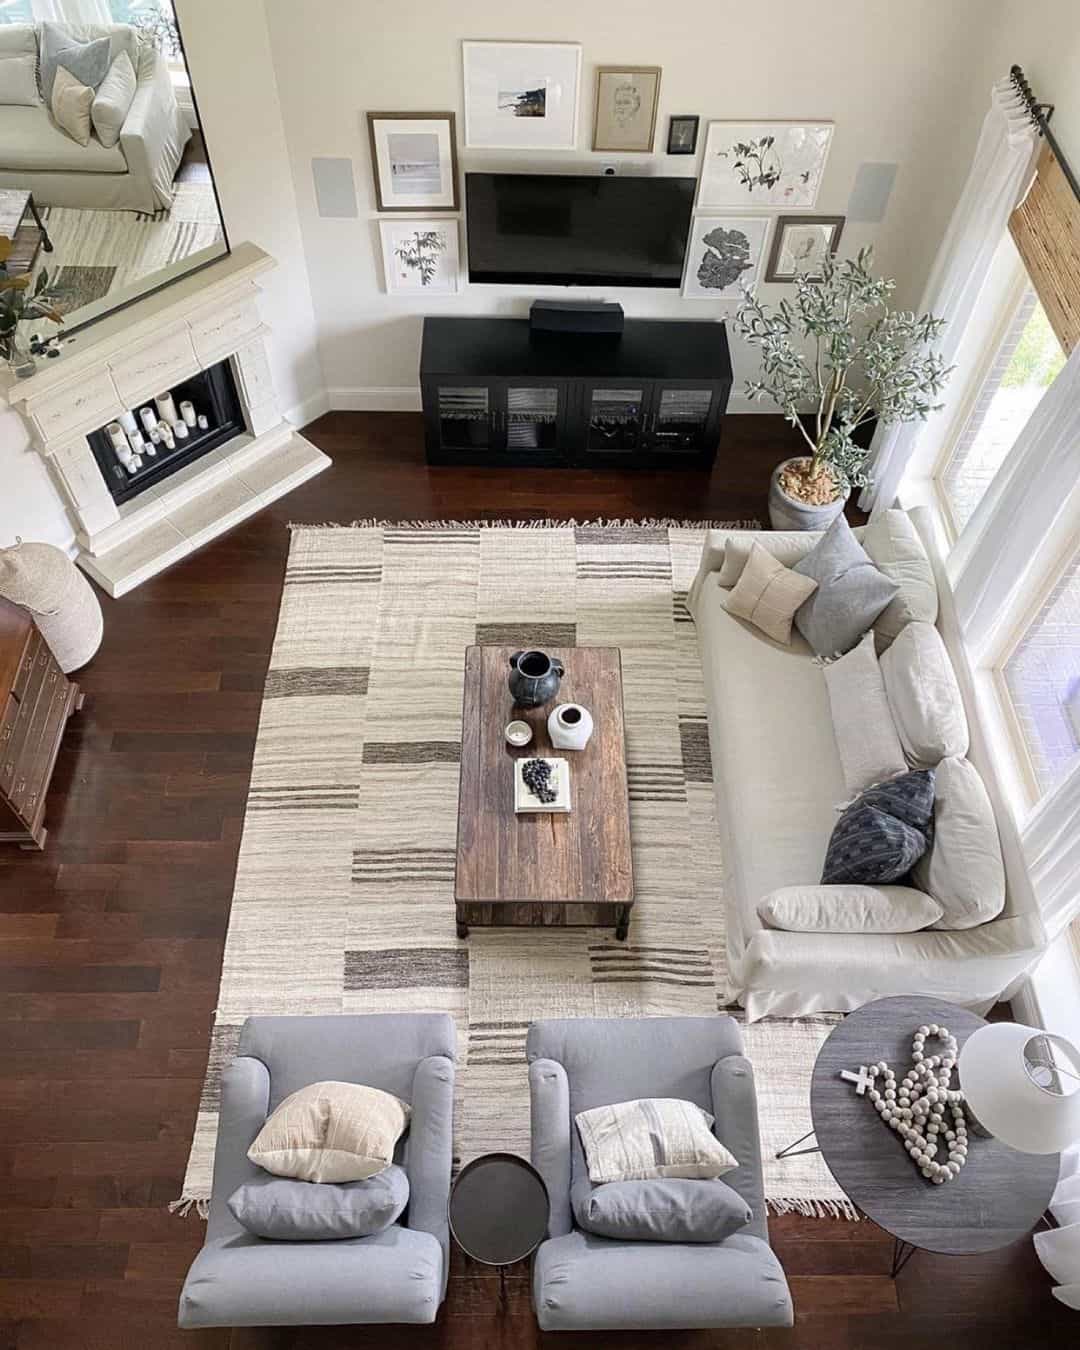 Living Room Layout With Awkward Corner